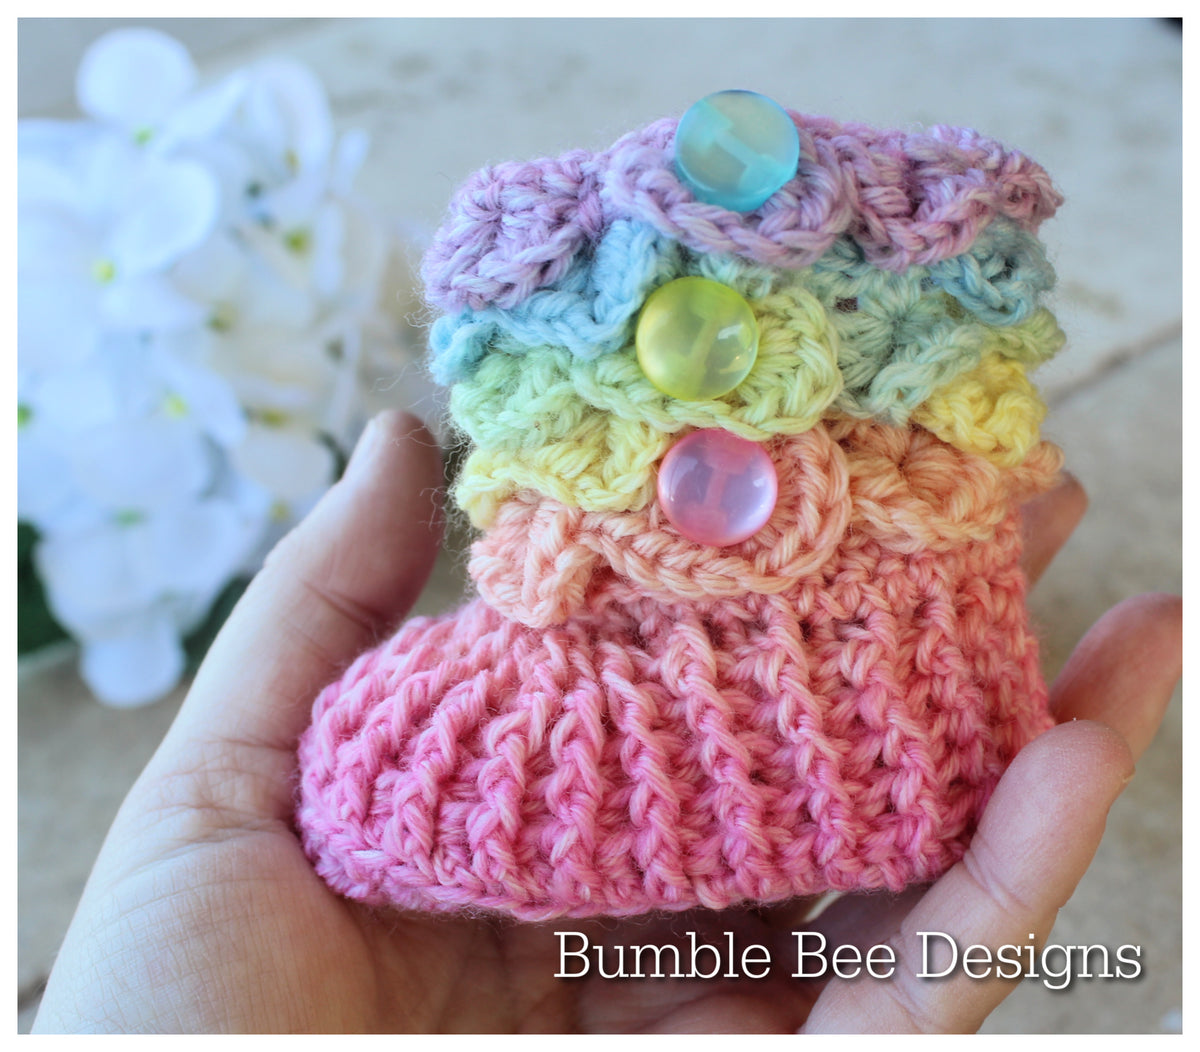 crocodile stitch baby booties that stay on, baby slippers, new baby gift, pastel rainbow booties